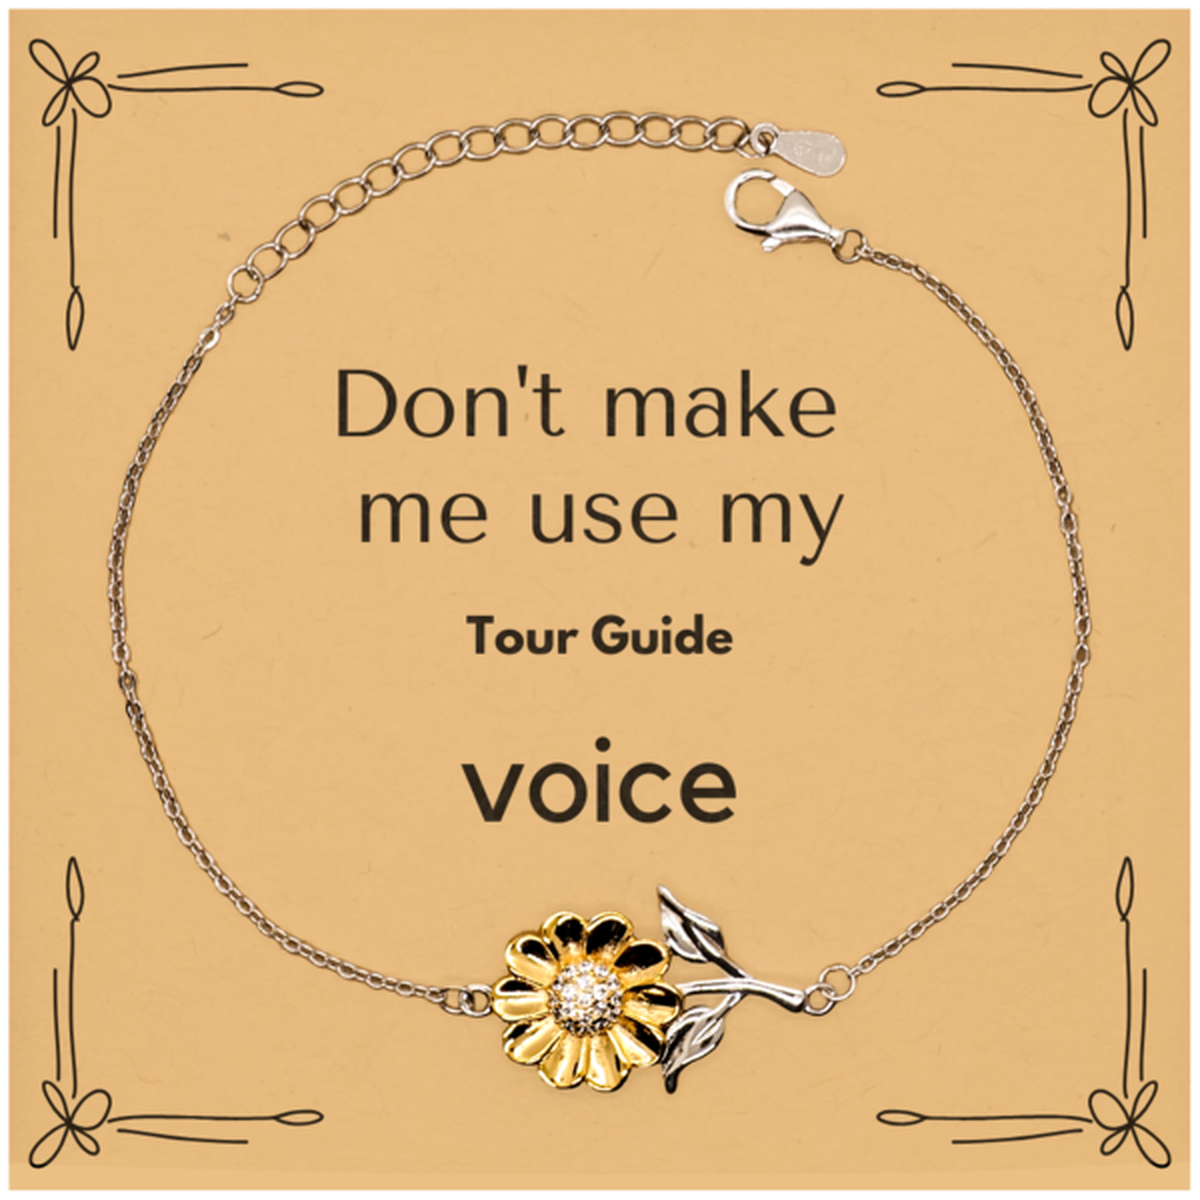 Don't make me use my Tour Guide voice, Sarcasm Tour Guide Card Gifts, Christmas Tour Guide Sunflower Bracelet Birthday Unique Gifts For Tour Guide Coworkers, Men, Women, Colleague, Friends